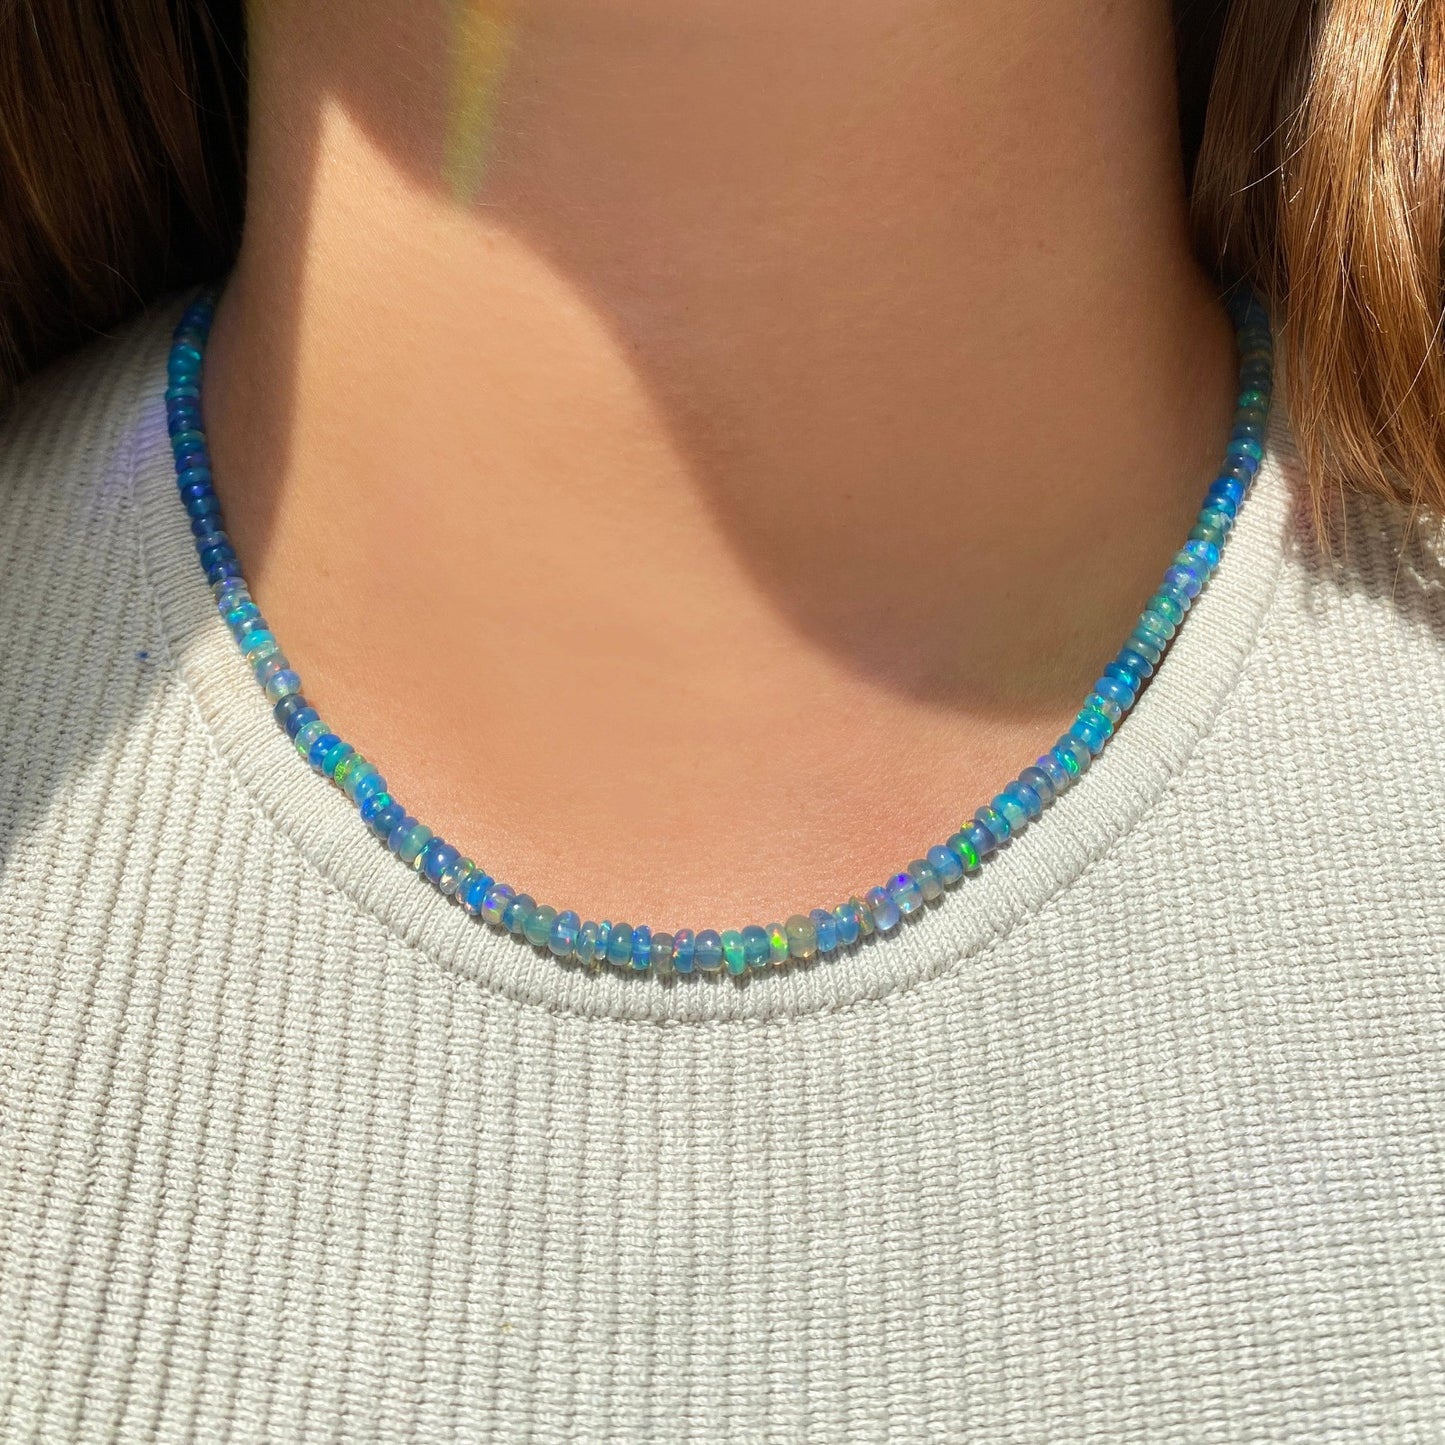 Shimmering beaded necklace made of smooth opal rondels in shades of blue, teal, and green on a slim gold oval clasp.